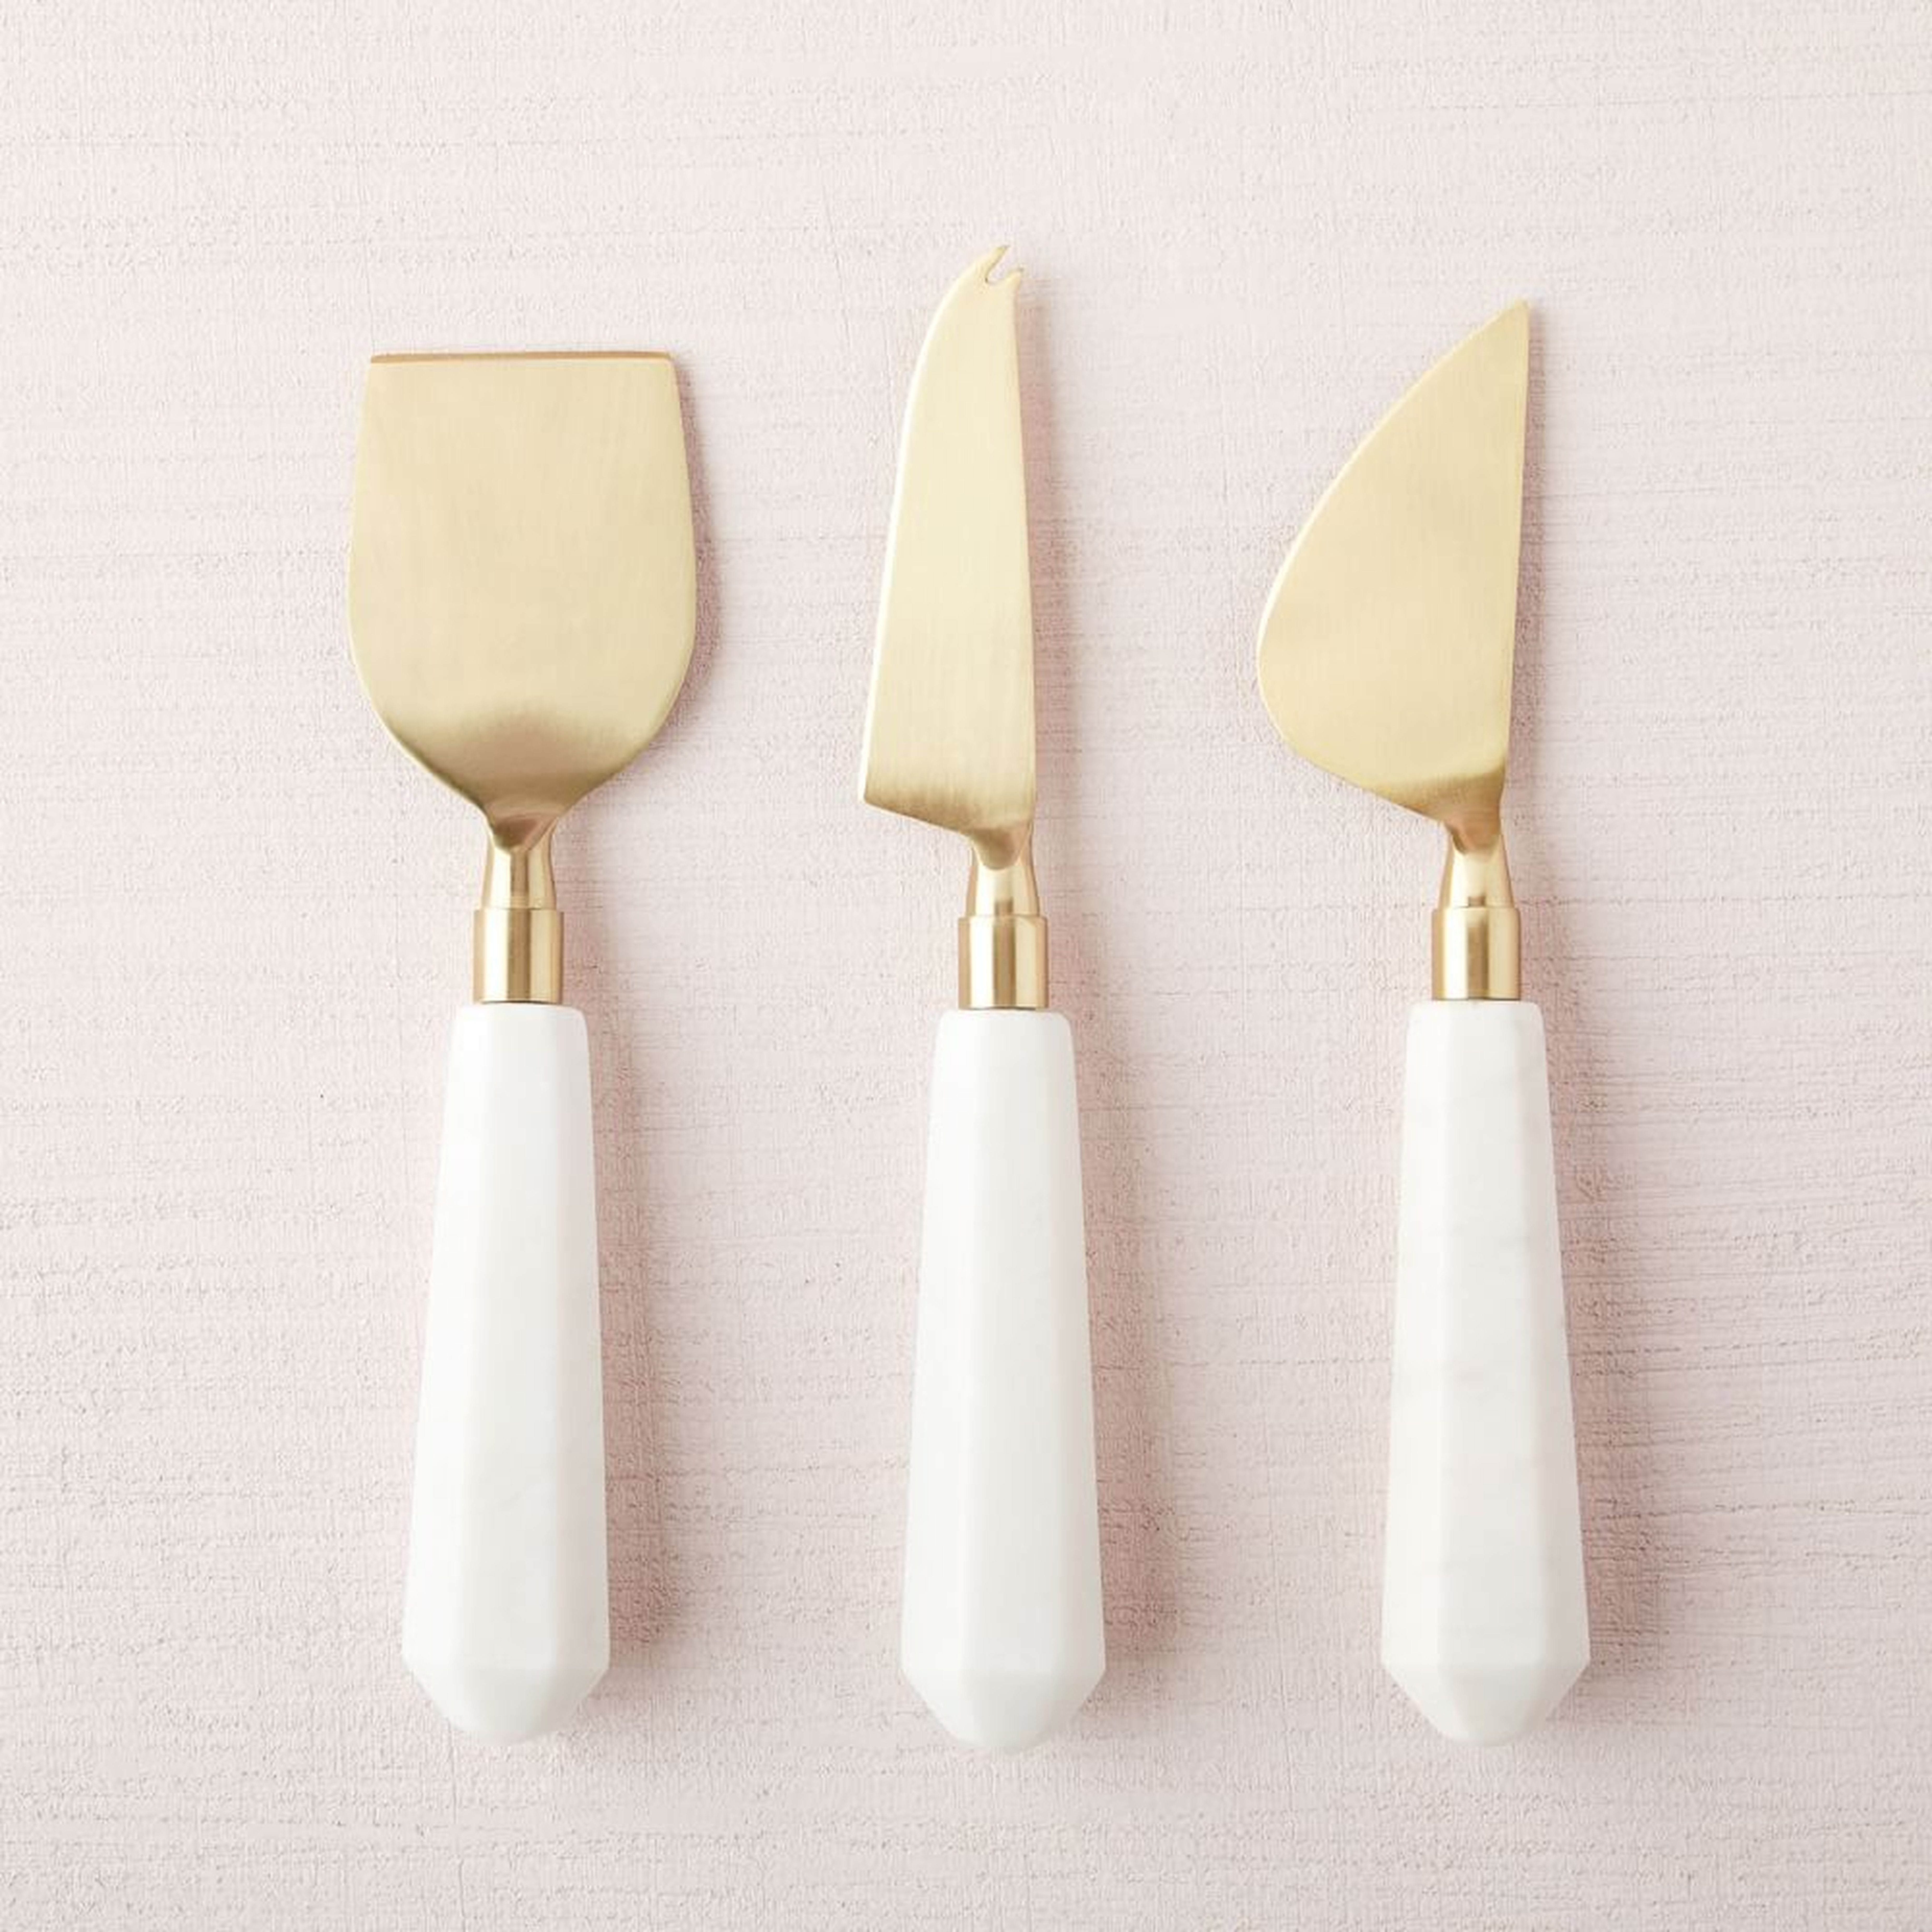 Marble + Brass Cheese Knives, Set of 3 - West Elm